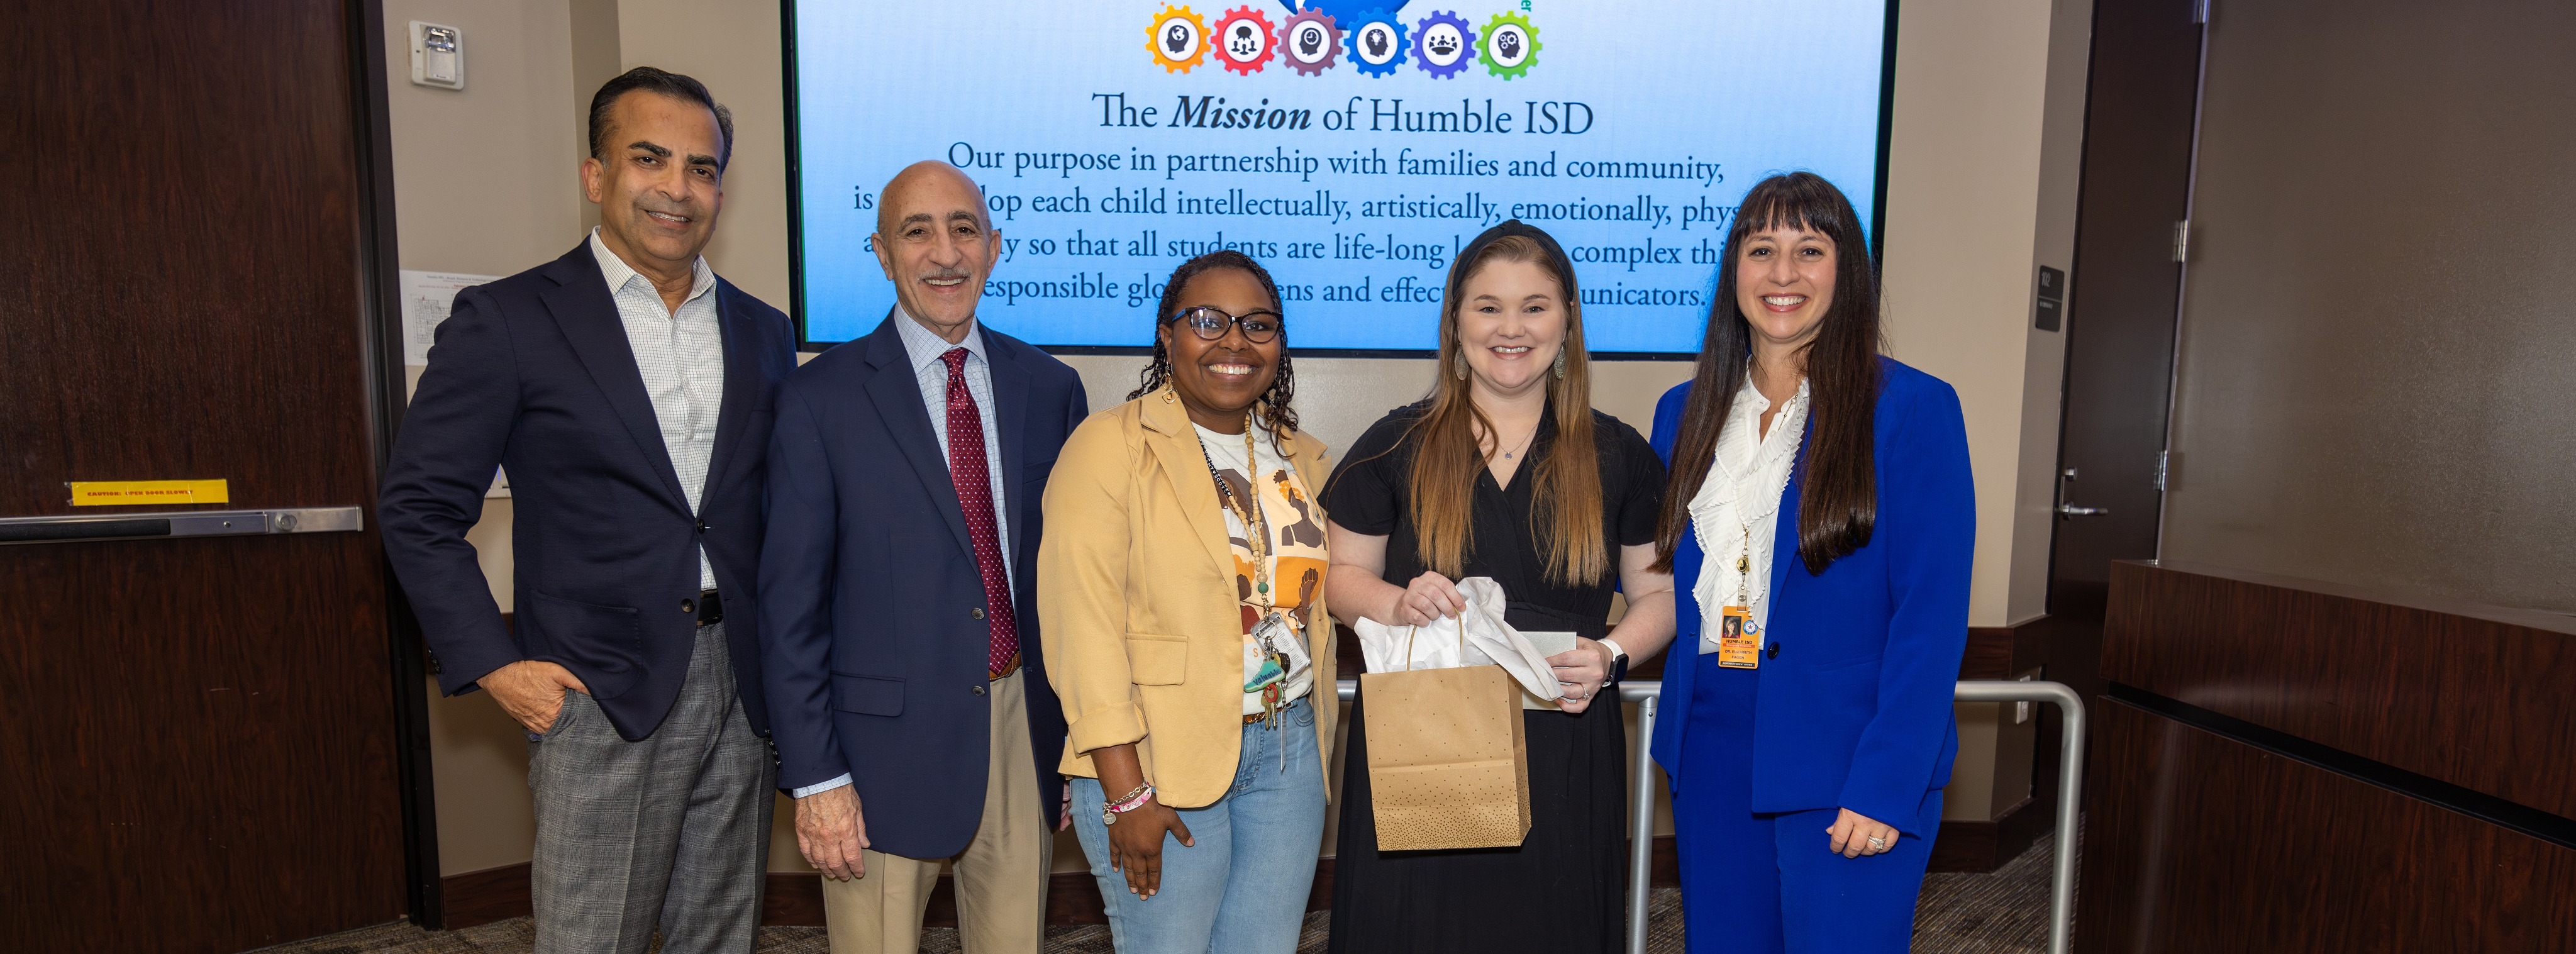 Jessica DeGraff Honored as Humble ISD Super Staffer